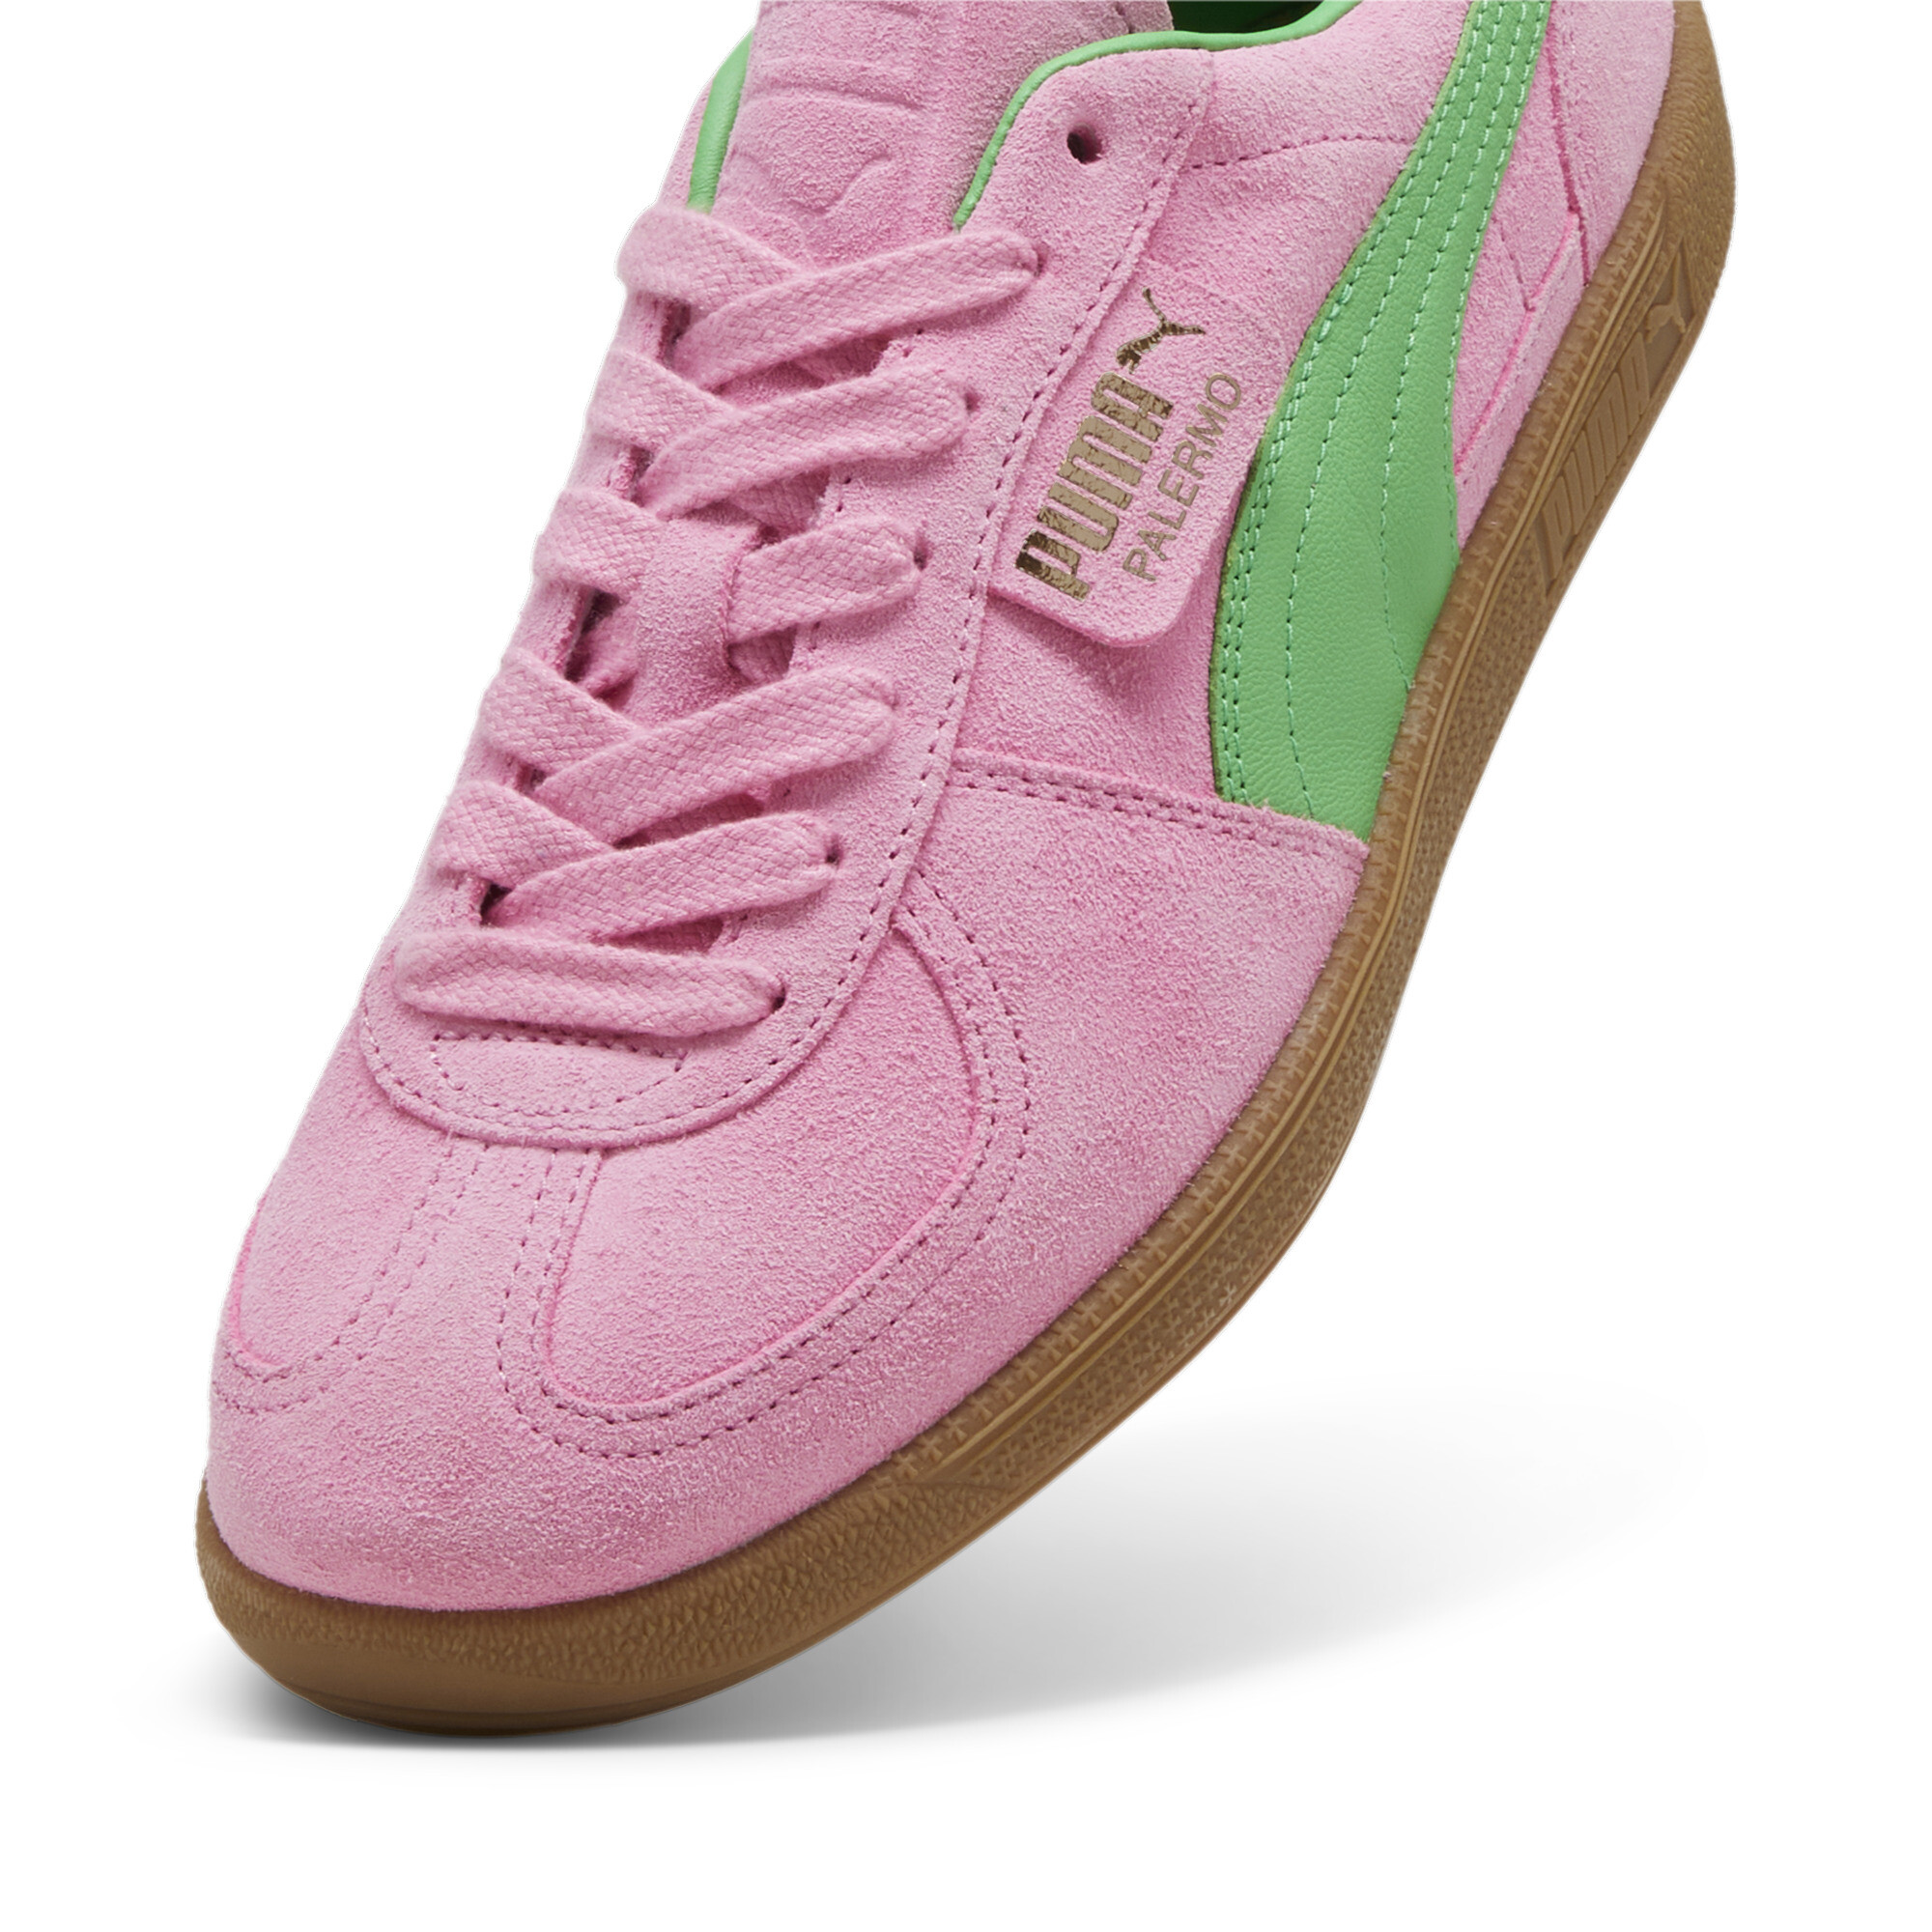 Men's PUMA Palermo Special Shoes In Pink, Size EU 39